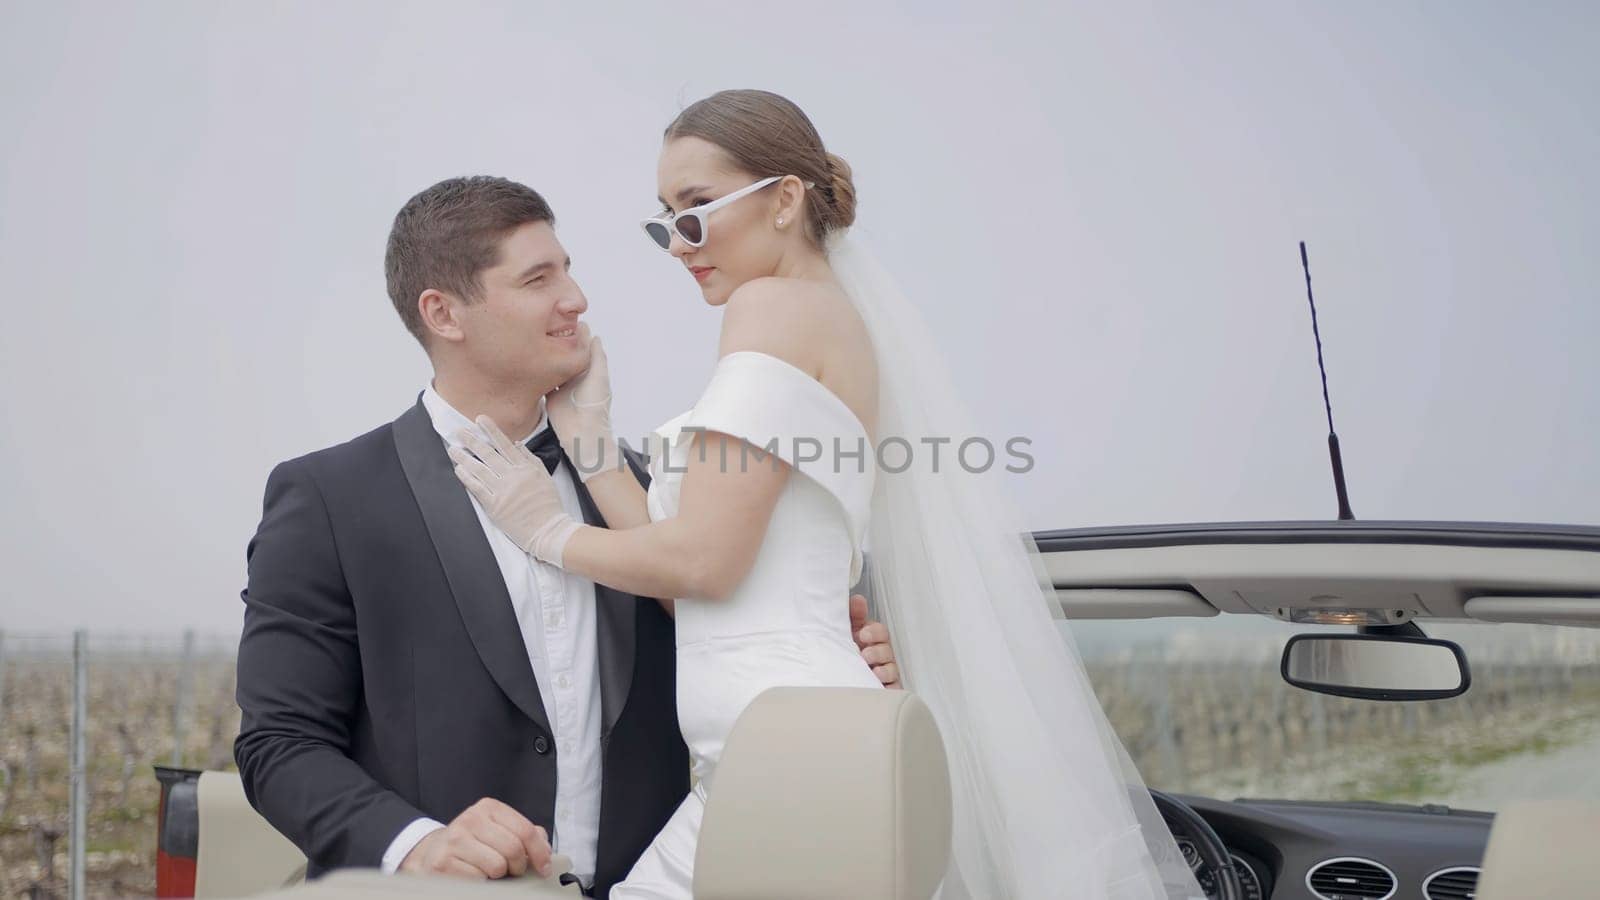 Just married couple, bride and groom in the open air. Action. Beautiful woman in white dress and sunglasses embracing man in suit while photosession in cabriolet. by Mediawhalestock